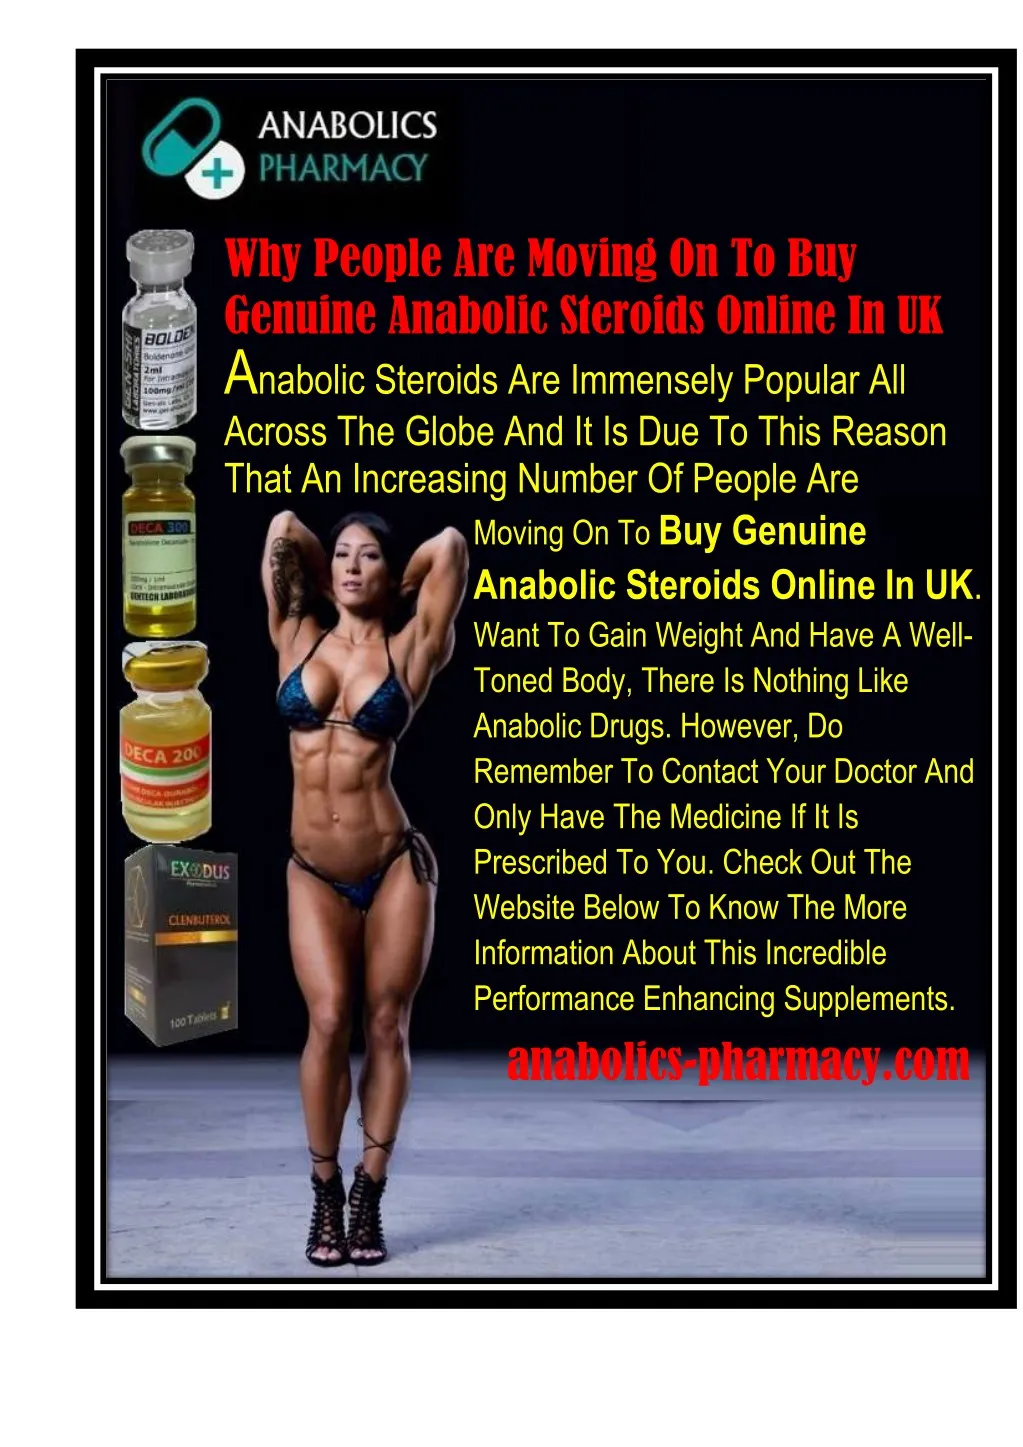 genuine anabolic steroids online in uk a nabolic